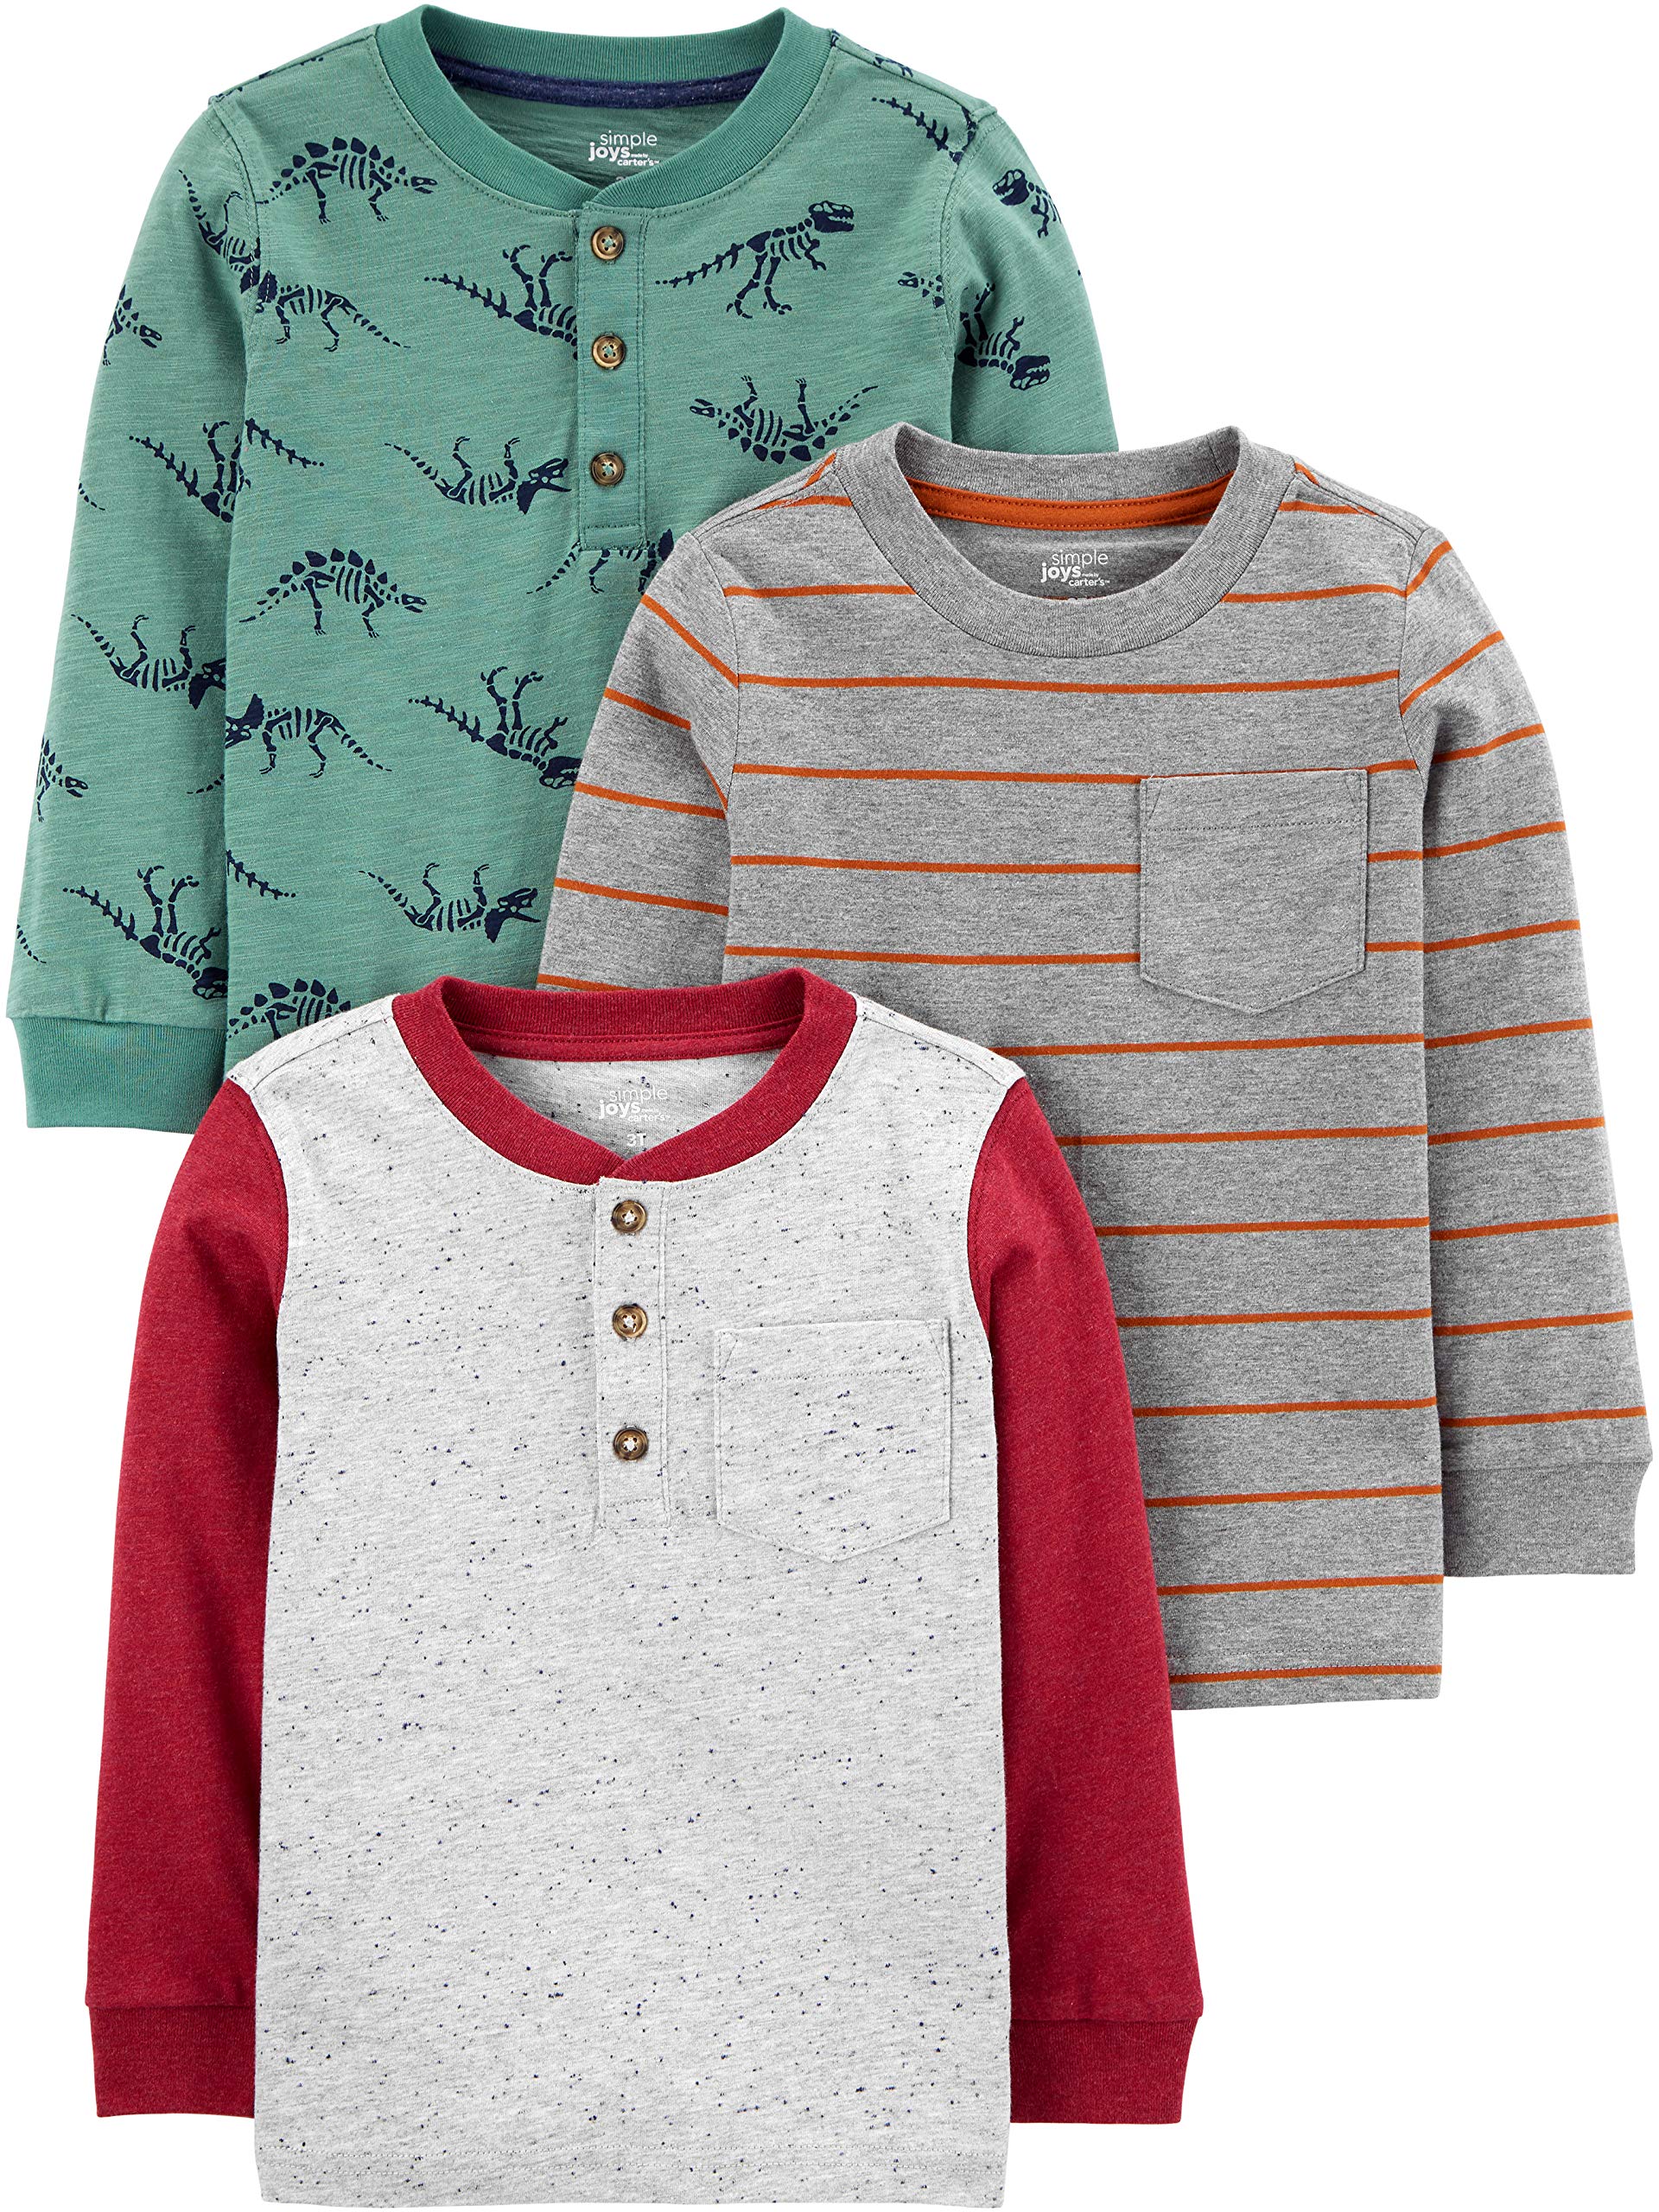 Simple Joys by Carter's Toddler Boys' Long-Sleeve Shirts, Pack of 3, Dinosaur/Stripe, 5T